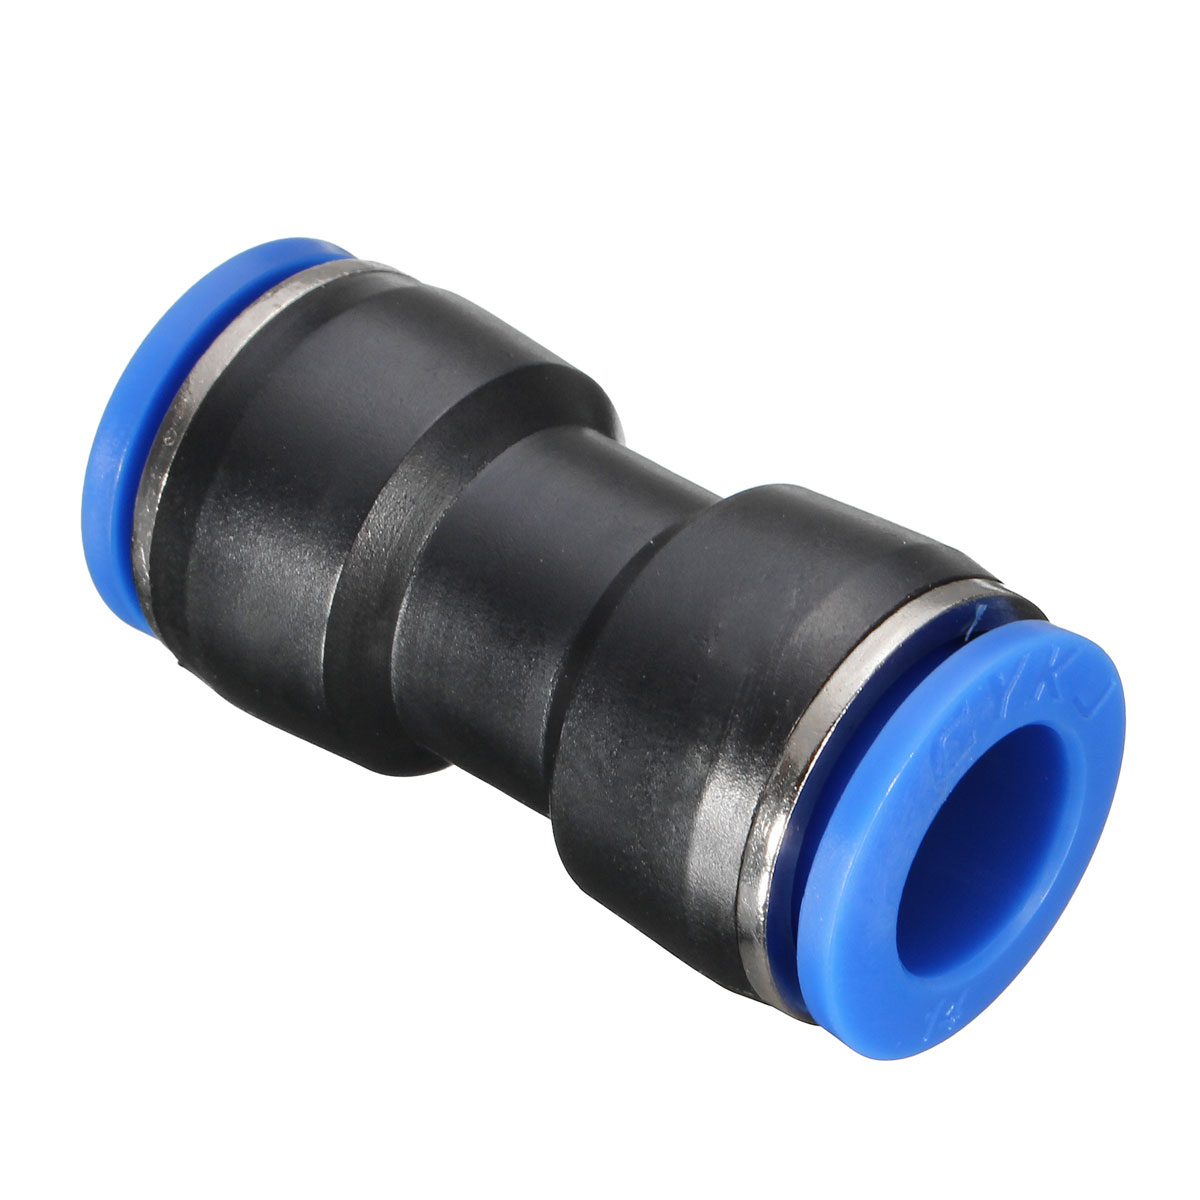 Pneumatic-Push-In-Fittings-For-Air-Water-Hose-Pipe-Connectors-Tube-Connector-1030560-9